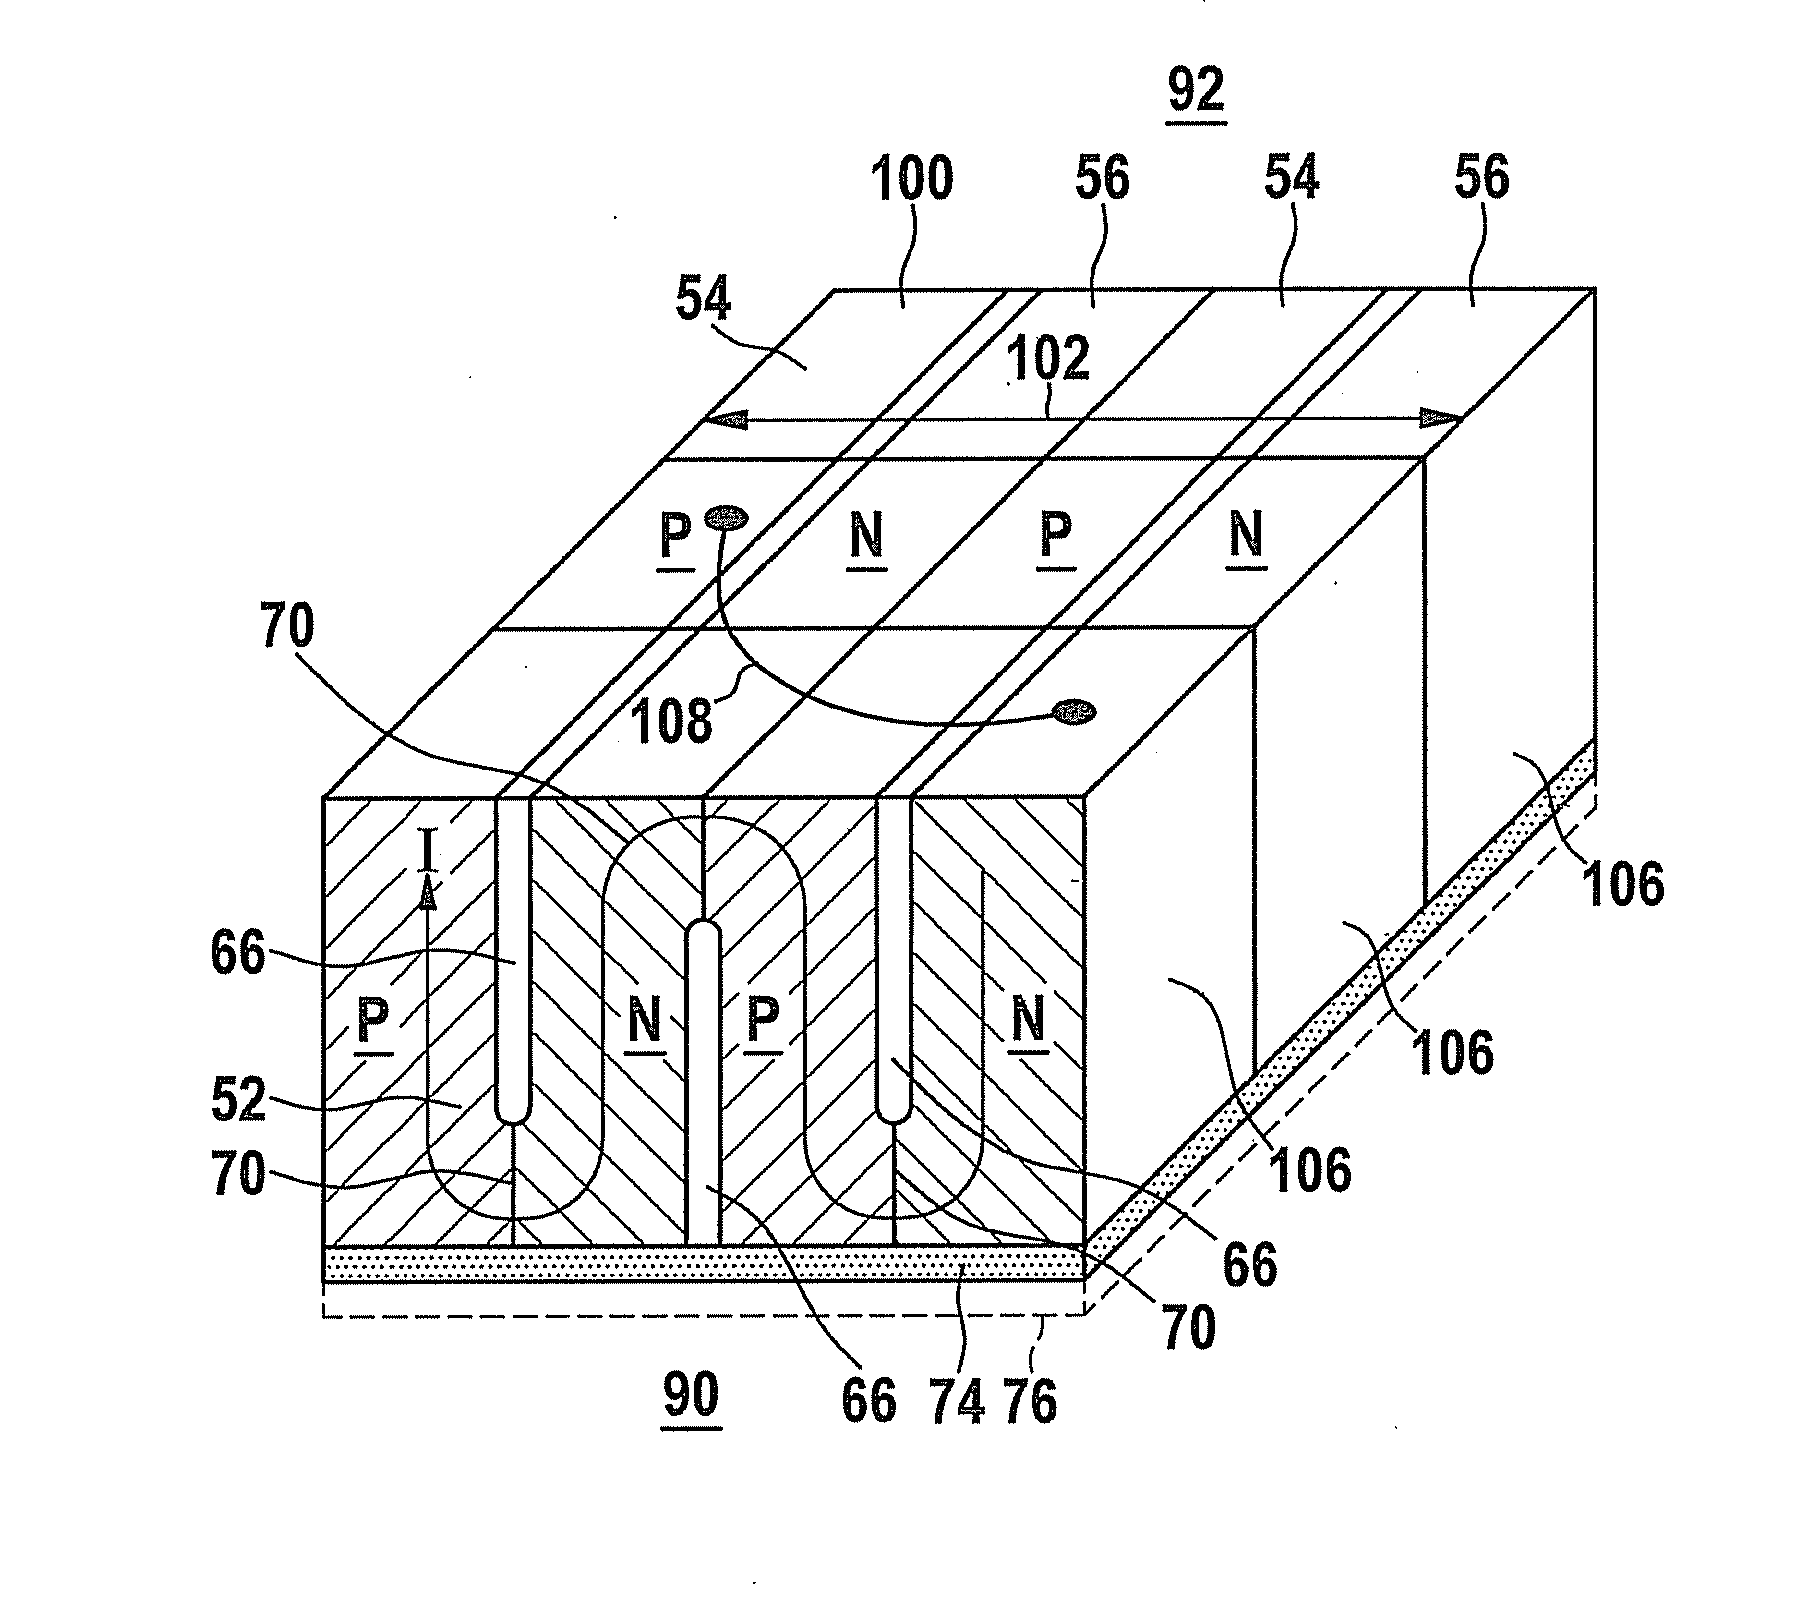 Thermoelectric generator including a thermoelectric module having a meandering p-n system